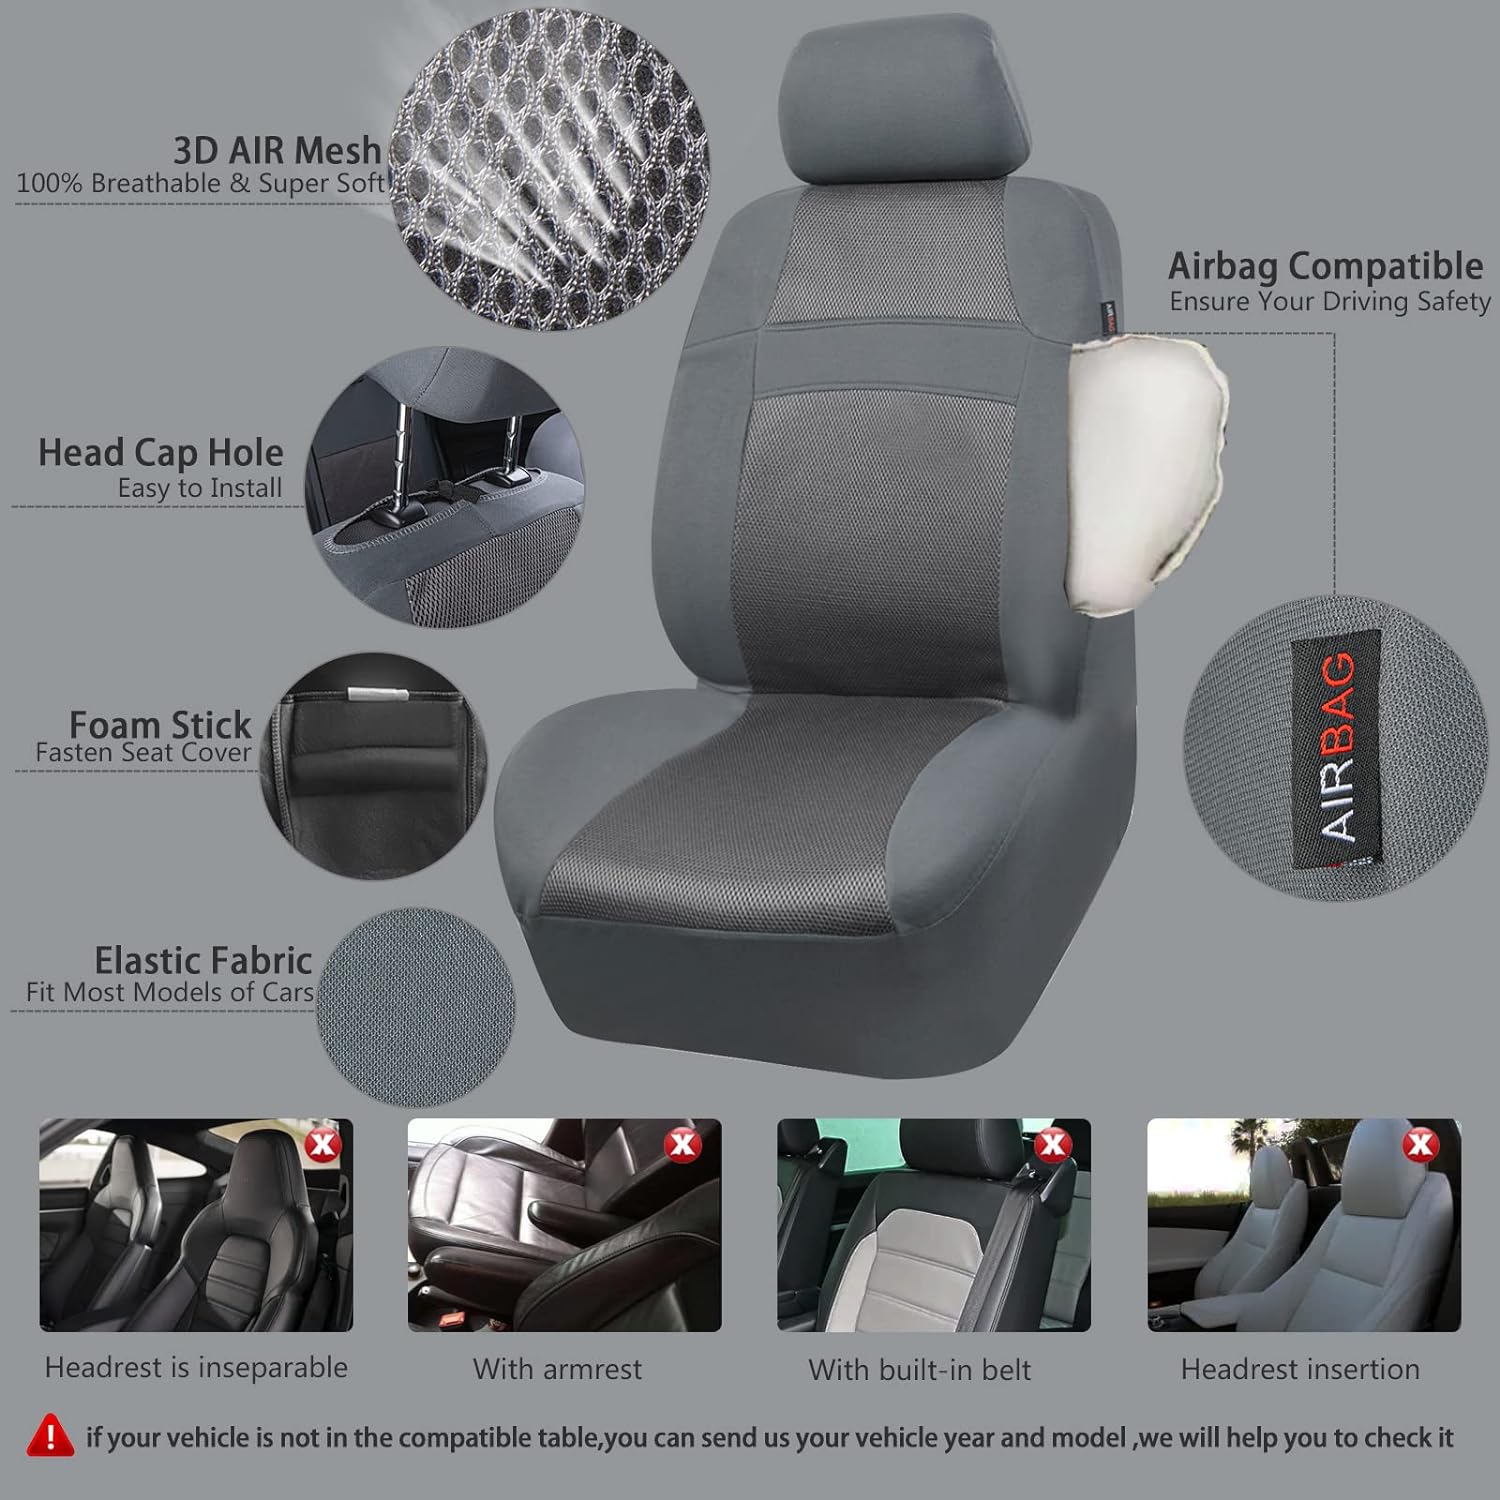 CAR PASS Seat Cover Full Sets and car mats & Steering Wheel Covers, 3D Air Mesh Car Seat Cover with 5mm Composite Sponge Inside,Airbag Compatible Universal Fit for SUV,Vans,sedans, Trucks, (Gray)